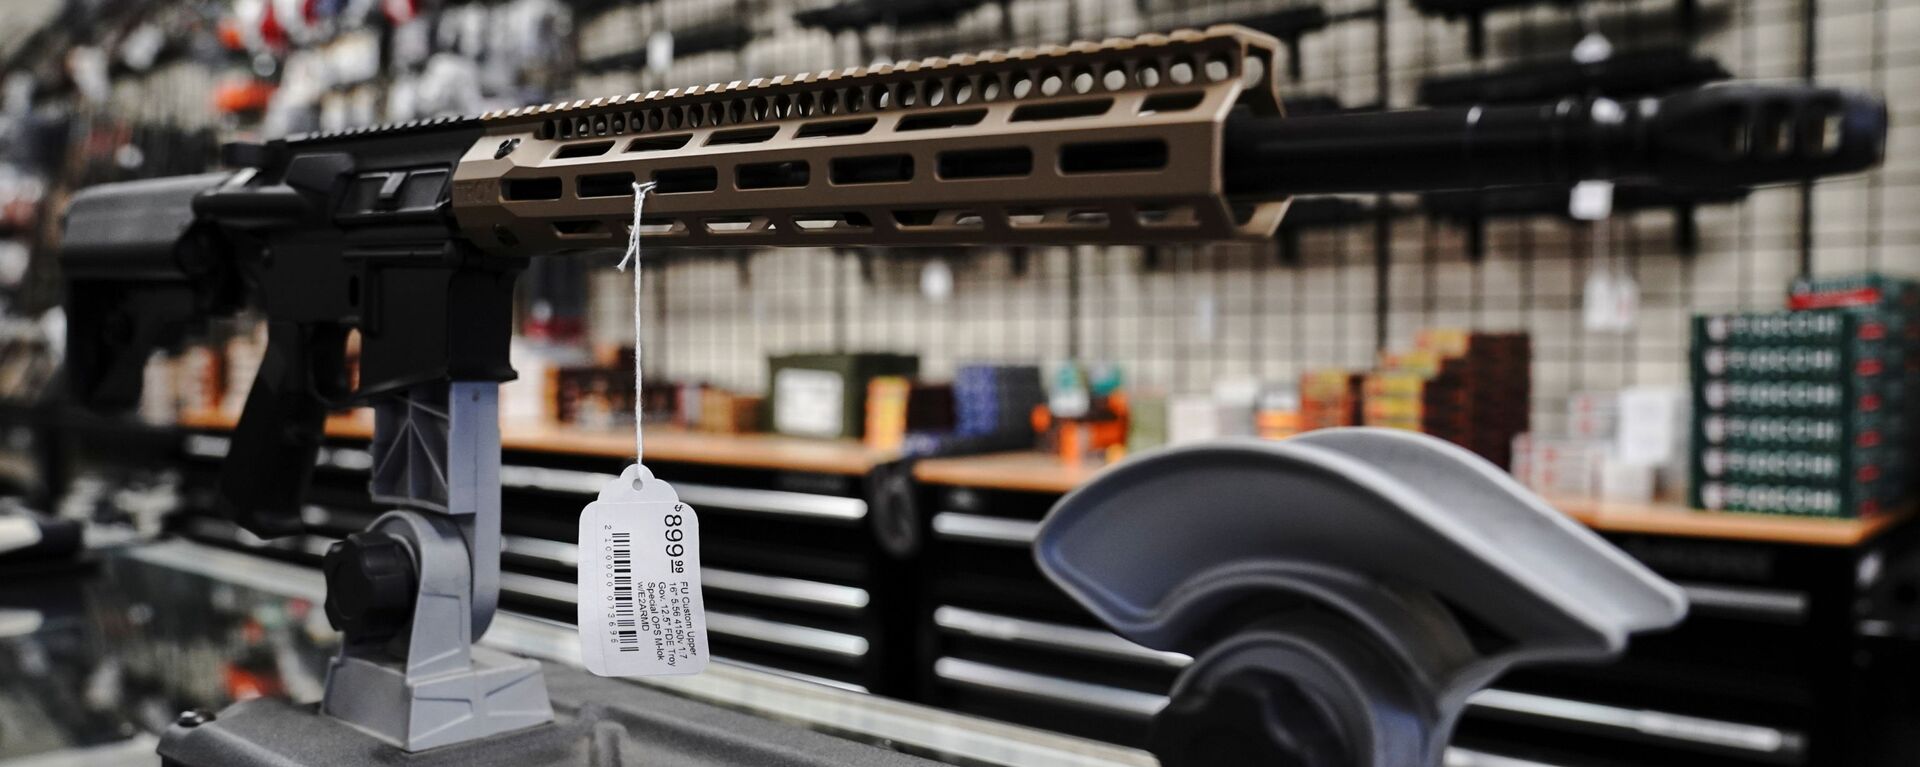 An FU custom upper receiver for an AR-15 style rifle is displayed for sale at Firearms Unknown, a gun store in Oceanside, California, U.S., April 12, 2021.  REUTERS/Bing Guan - Sputnik International, 1920, 17.04.2021